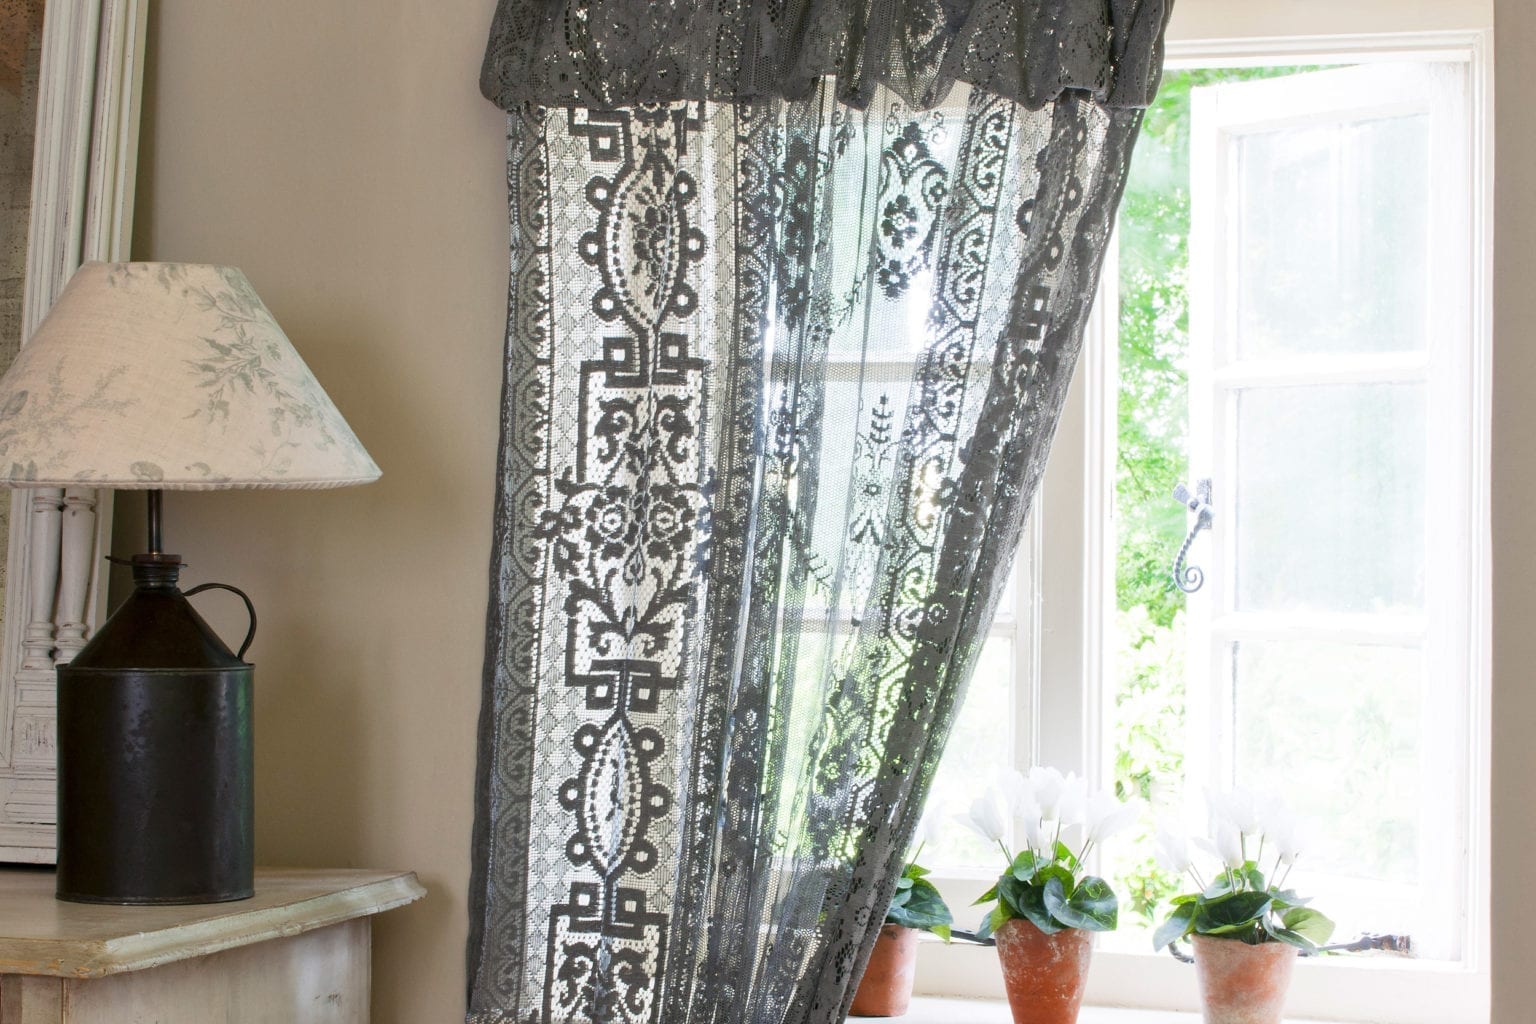 Chalk Paint® furniture paint in Graphite dyed lace dyed curtains by Annie Sloan